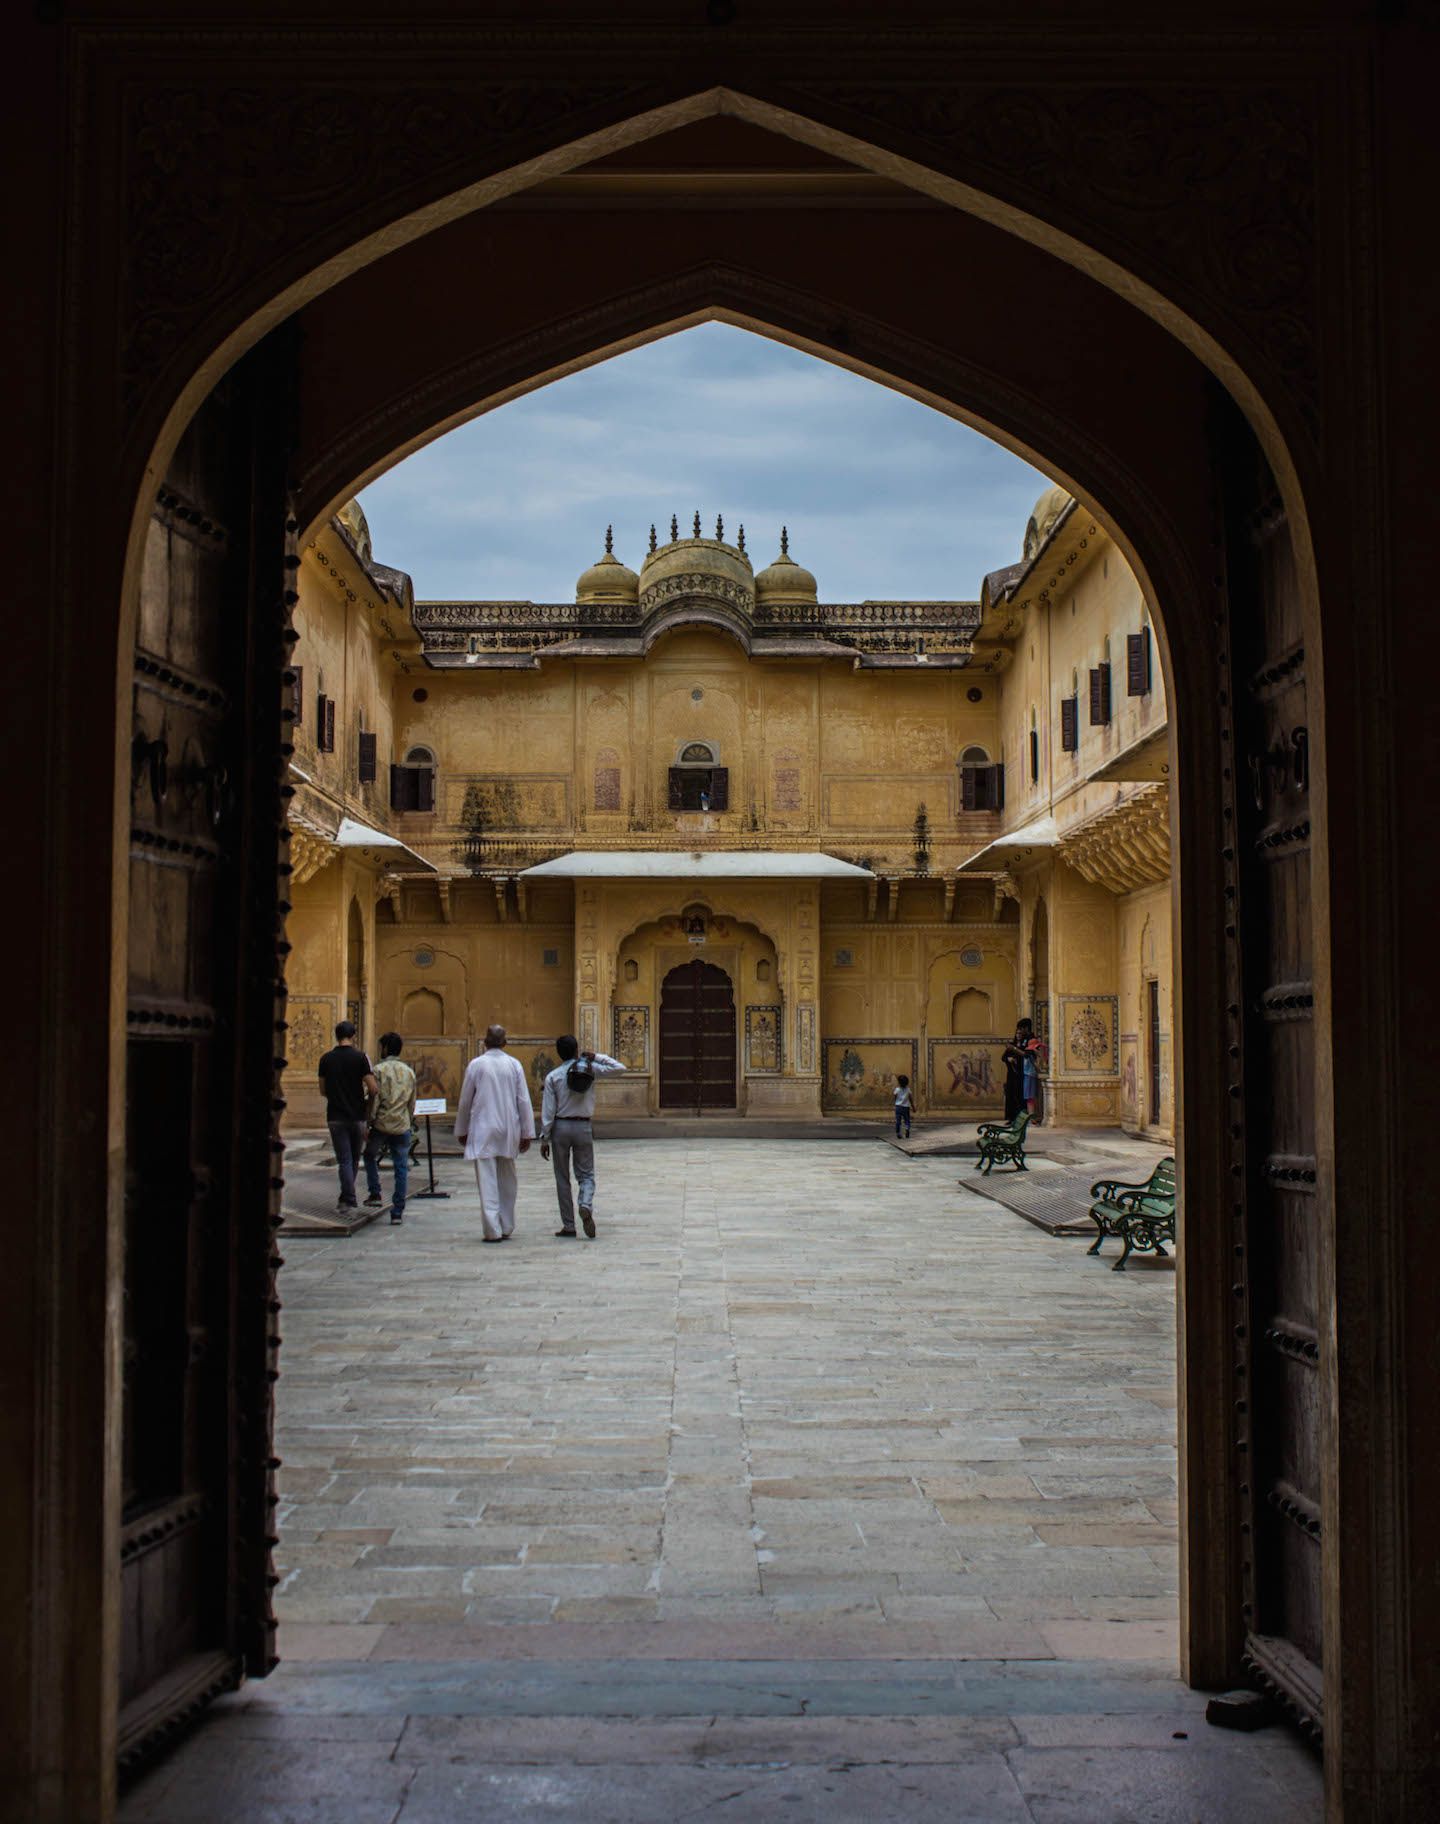 Entering the Nahargarh Fort in Jaipur, India